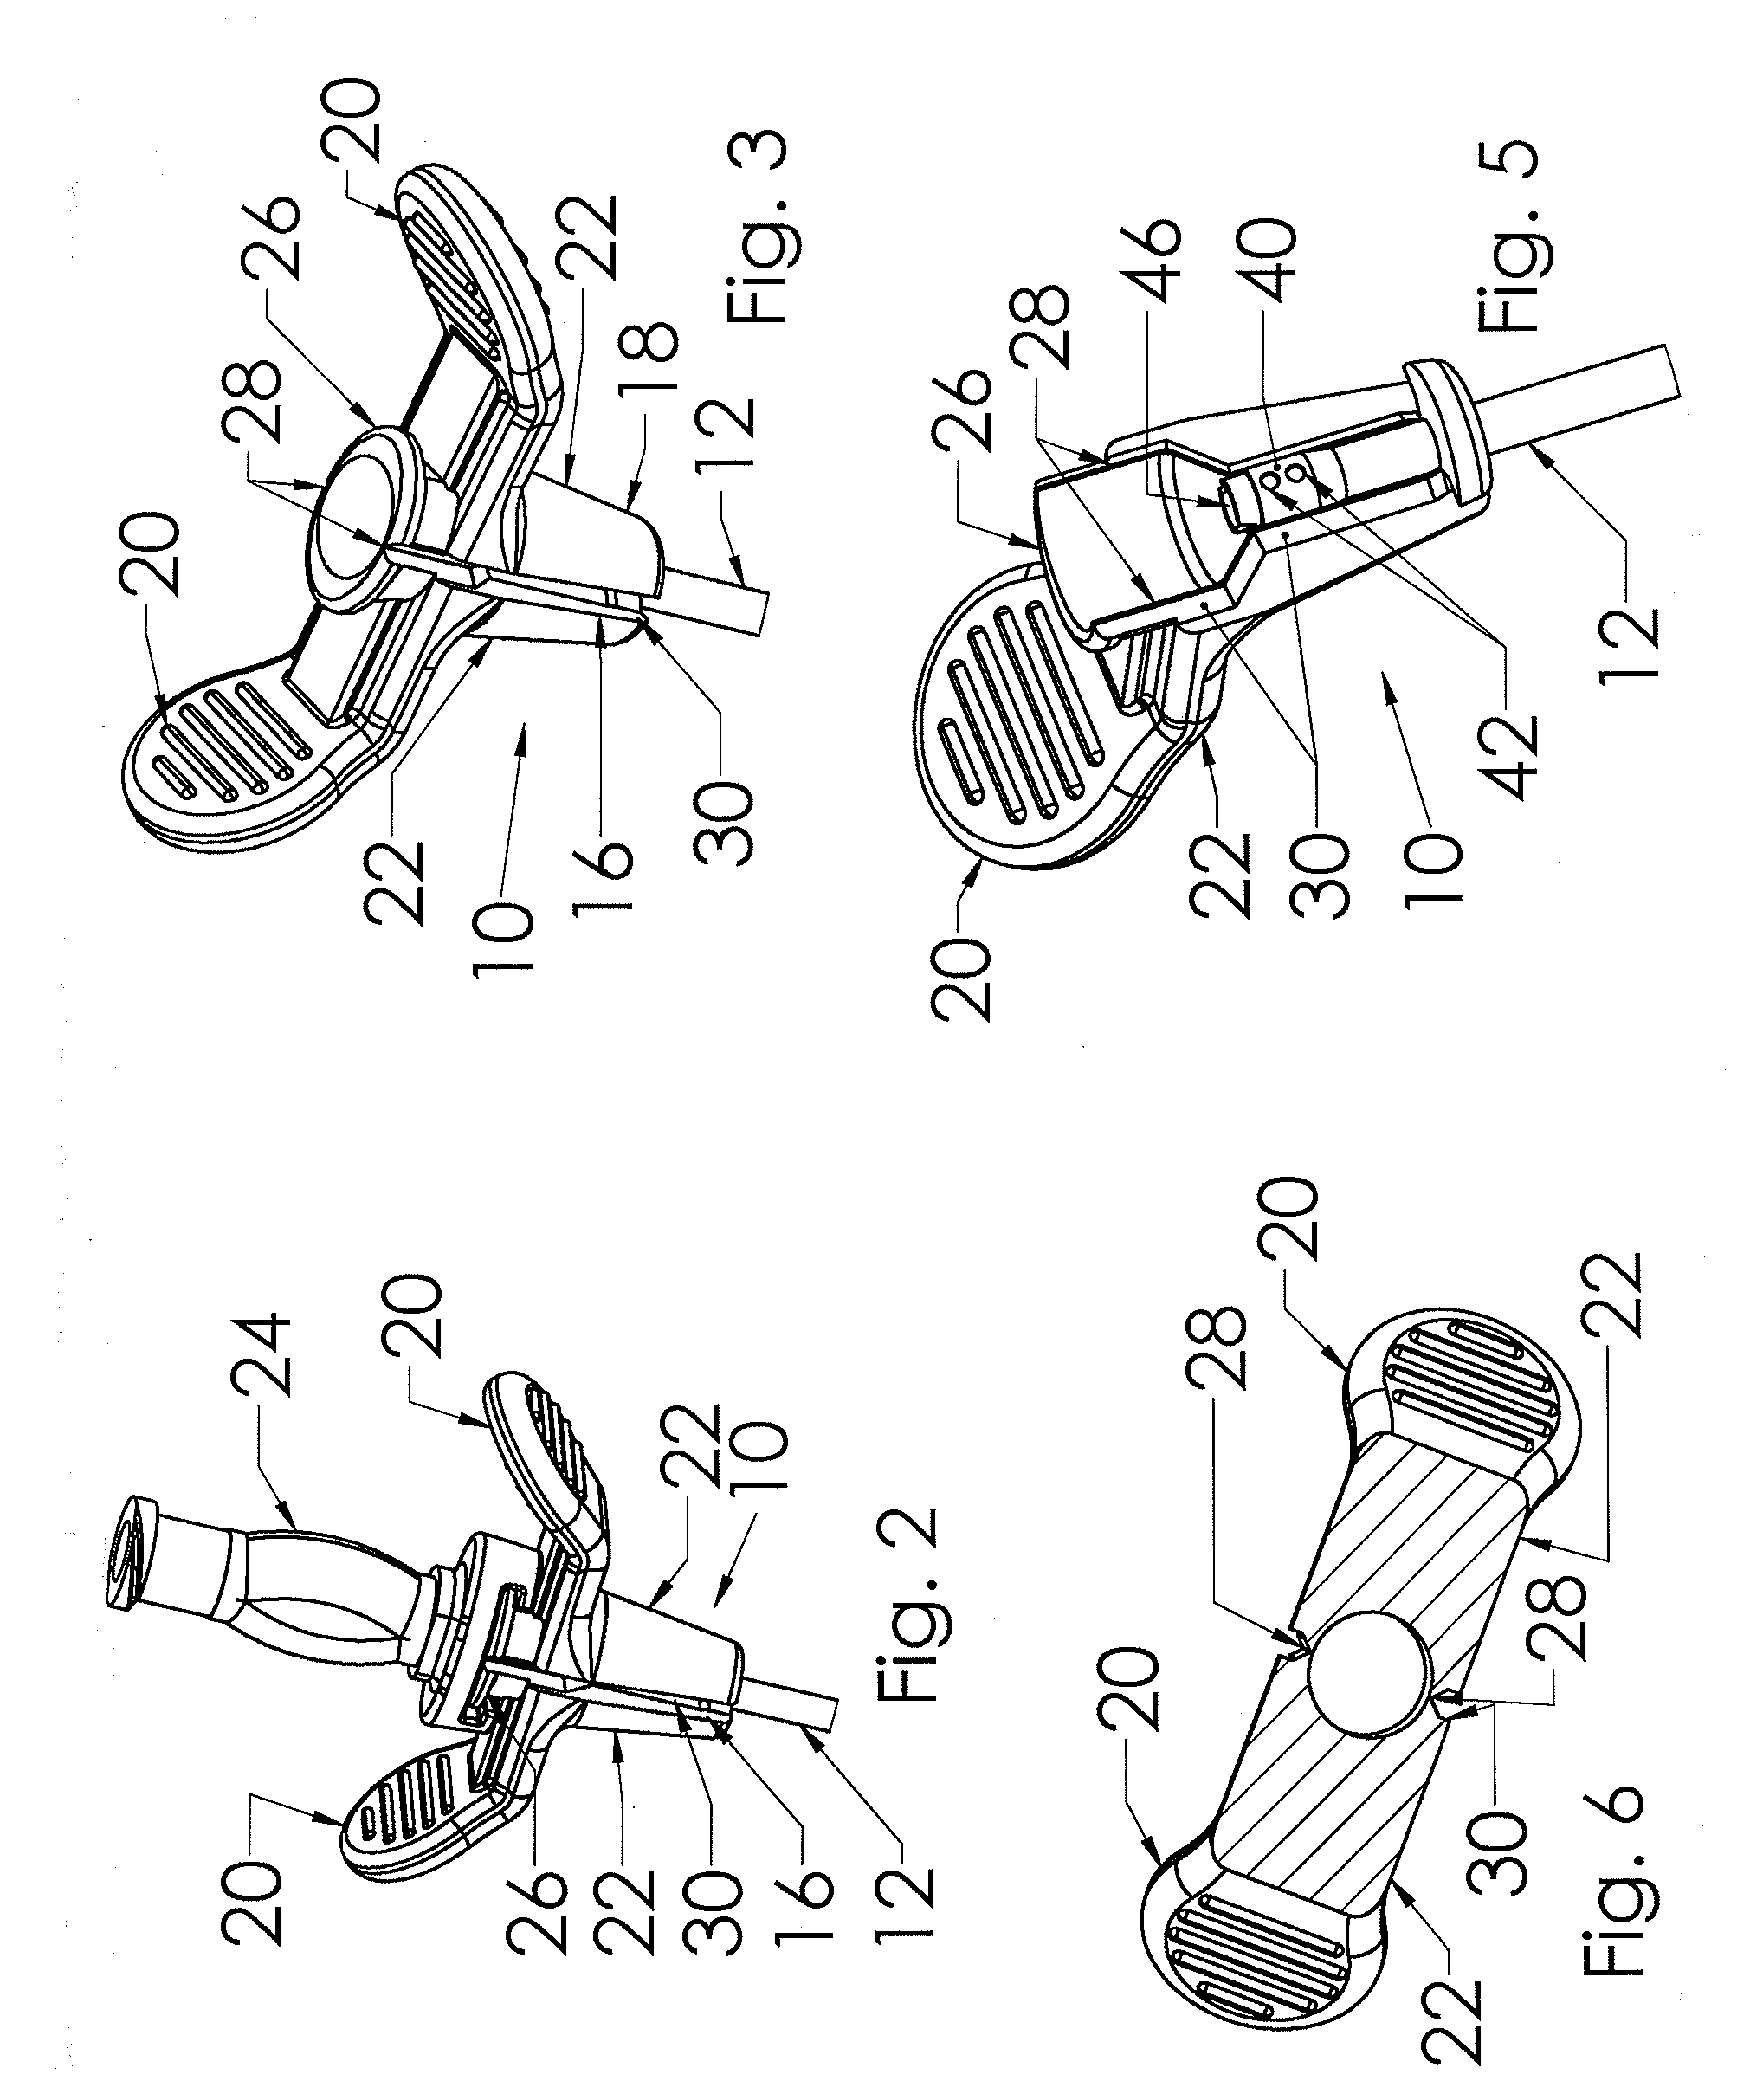 Introducer Sheath Assembly with Hub and Method of Joining a Hub to a Sheath Tube